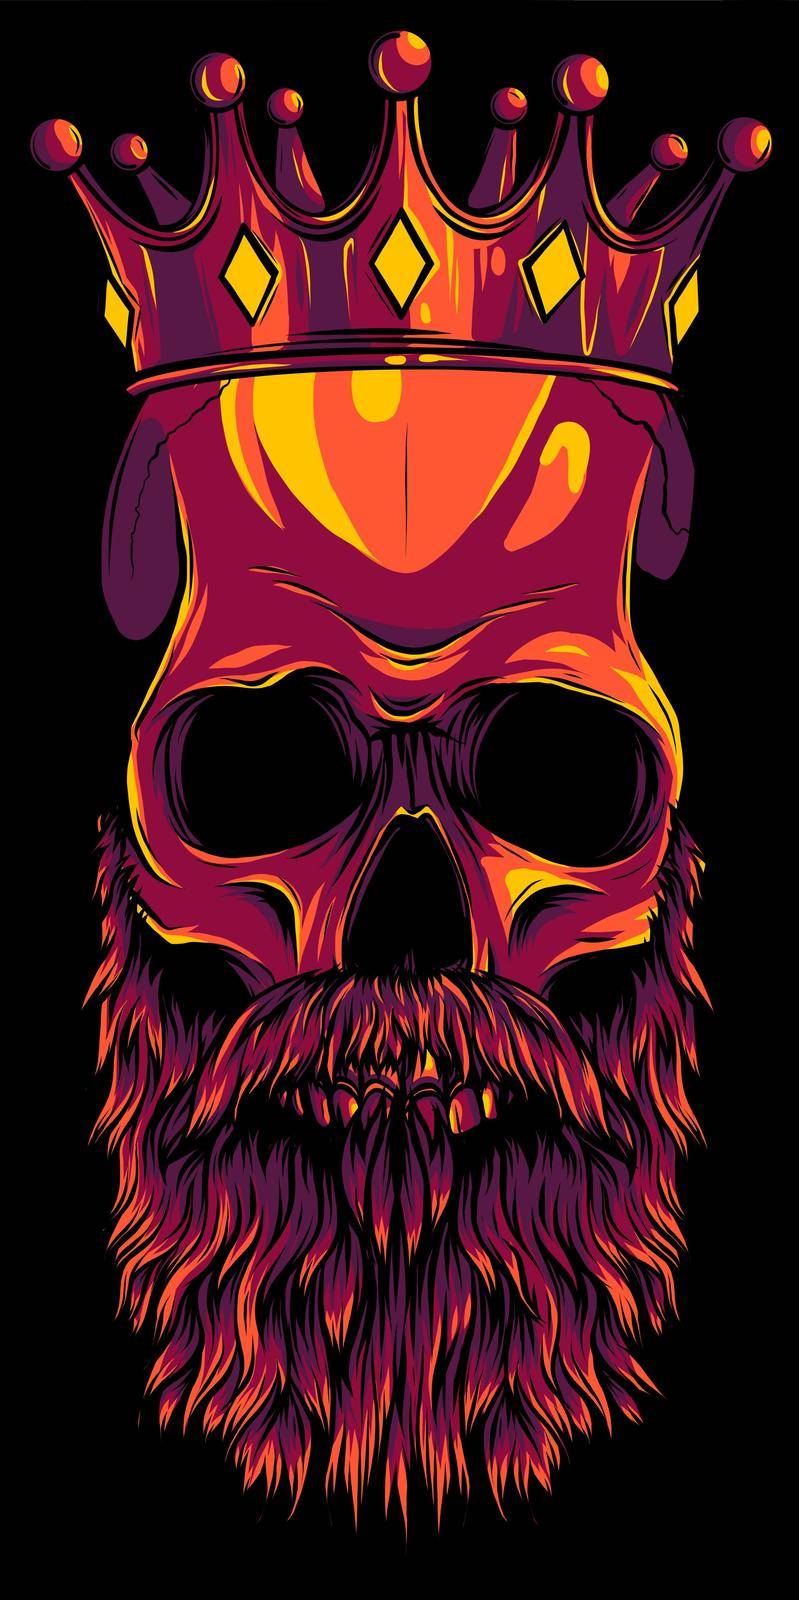 vector illustration of king skull with beard by dean